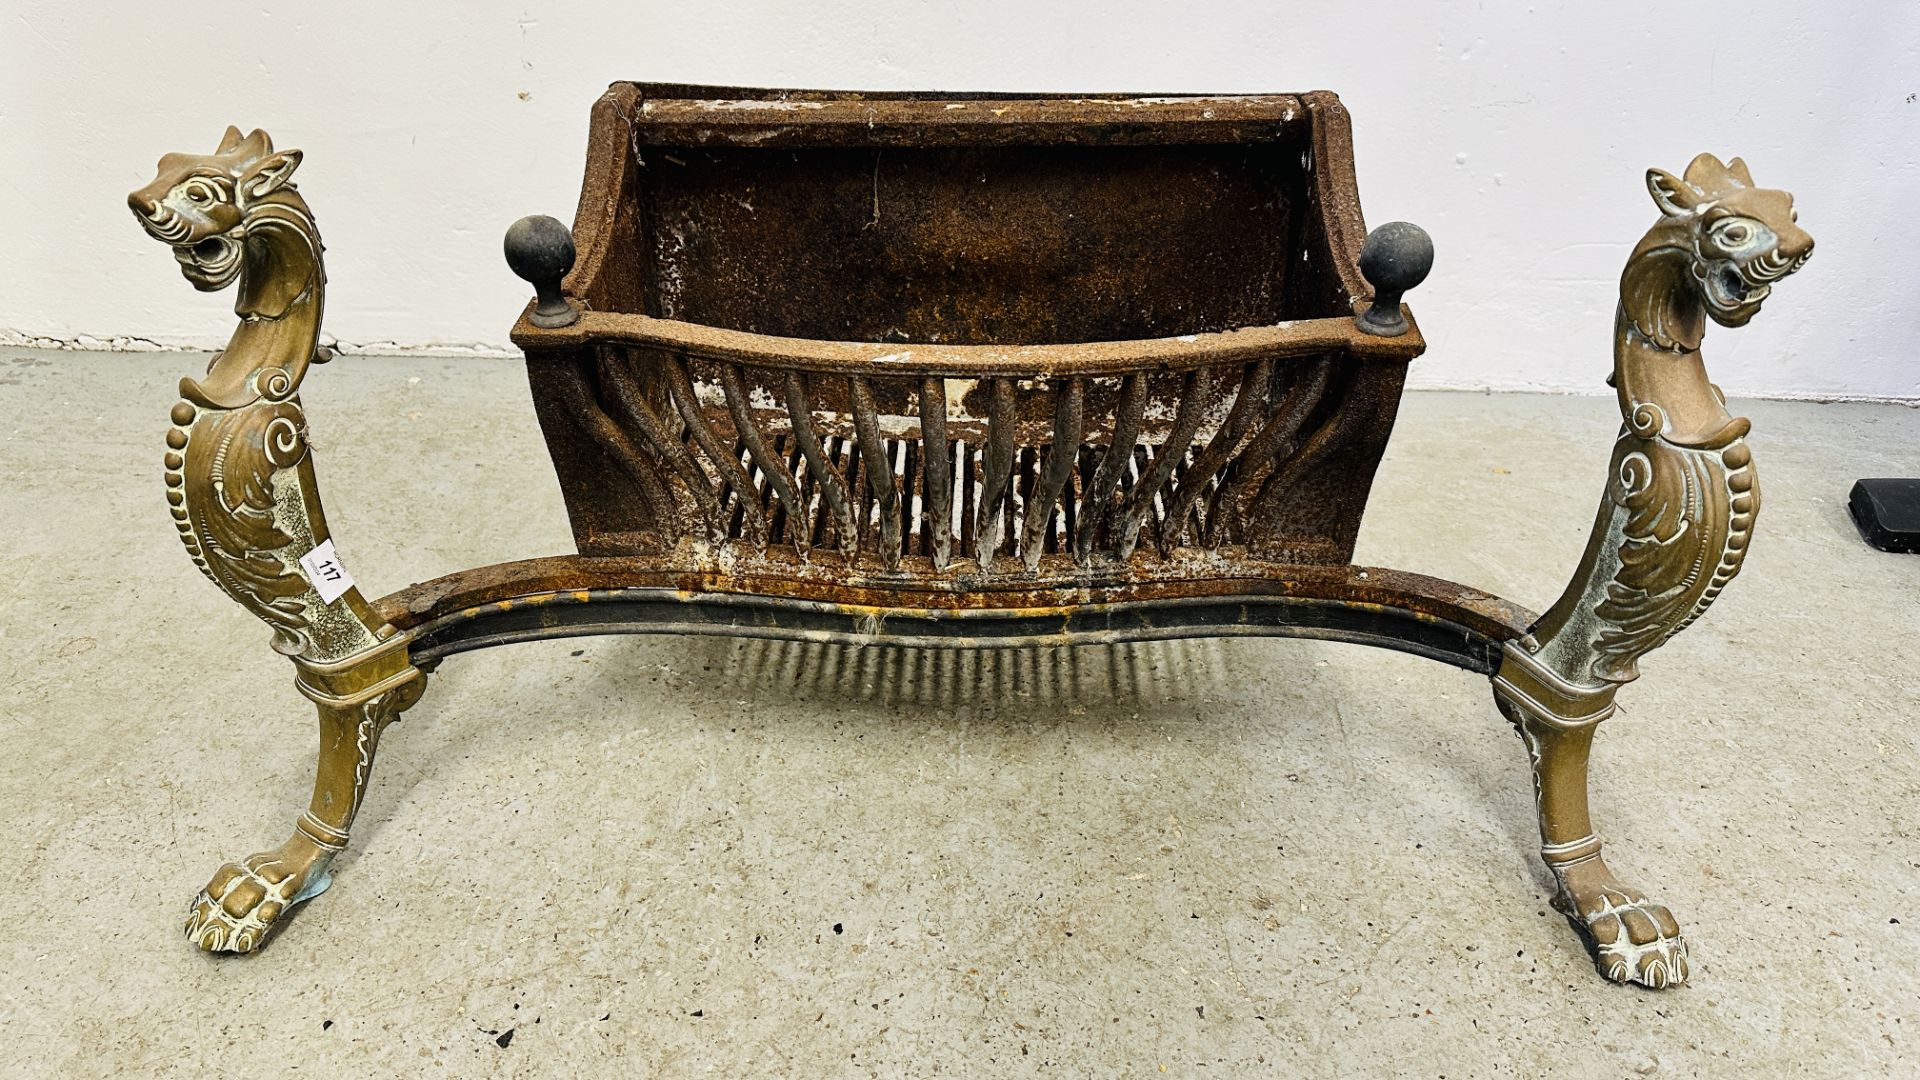 LARGE ANTIQUE CAST IRON FIRE BASKET, THE HEAVY BRASS FORELEGS DETAILED WITH MYTHICAL CREATURES,